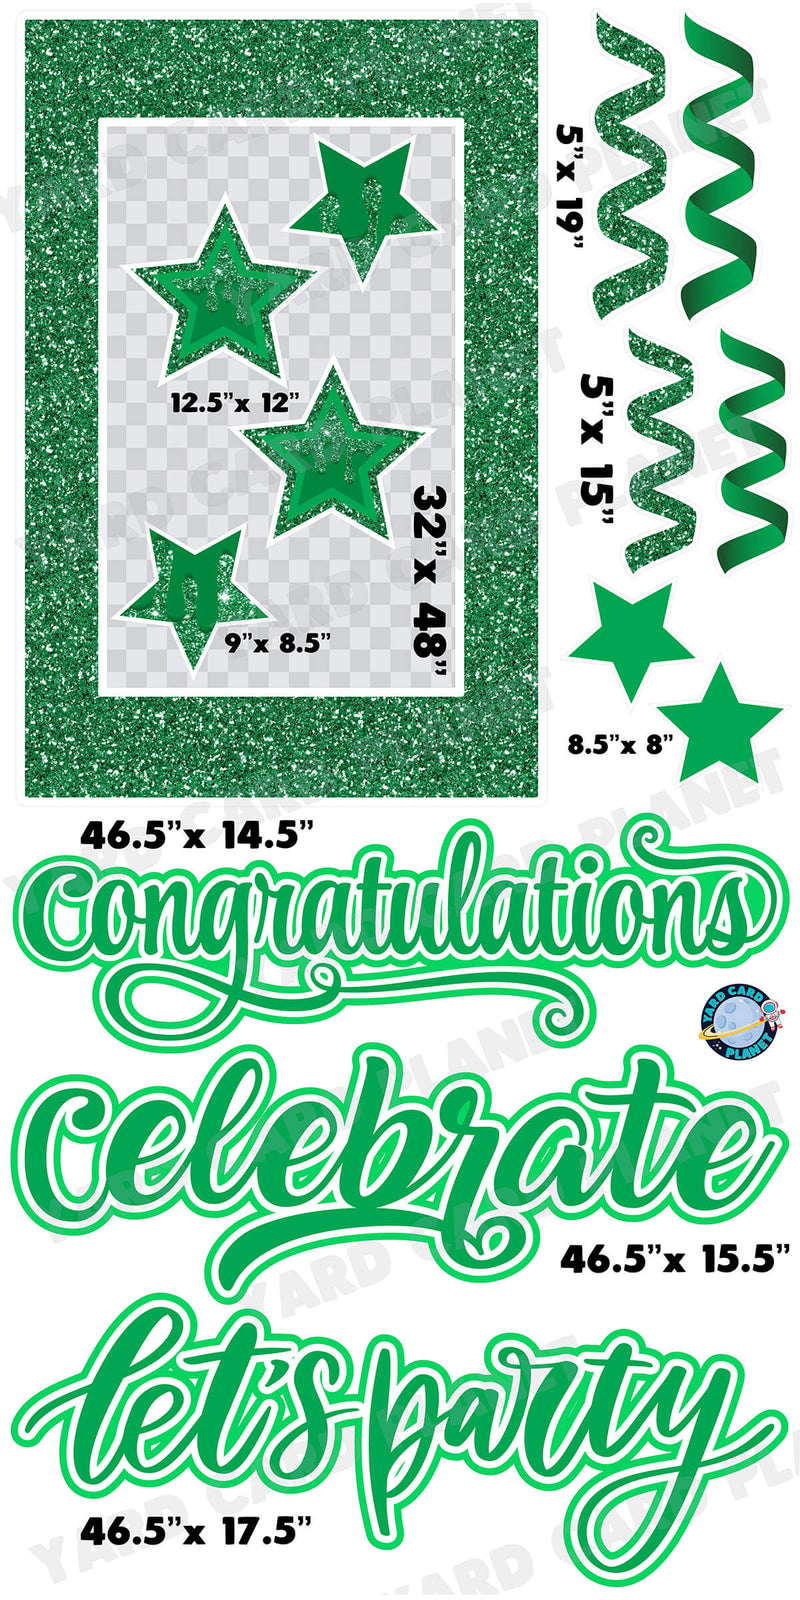 Green Glitter Multi Purpose EZ Frame with Interchangeable Greetings and Matching Yard Card Flair Set